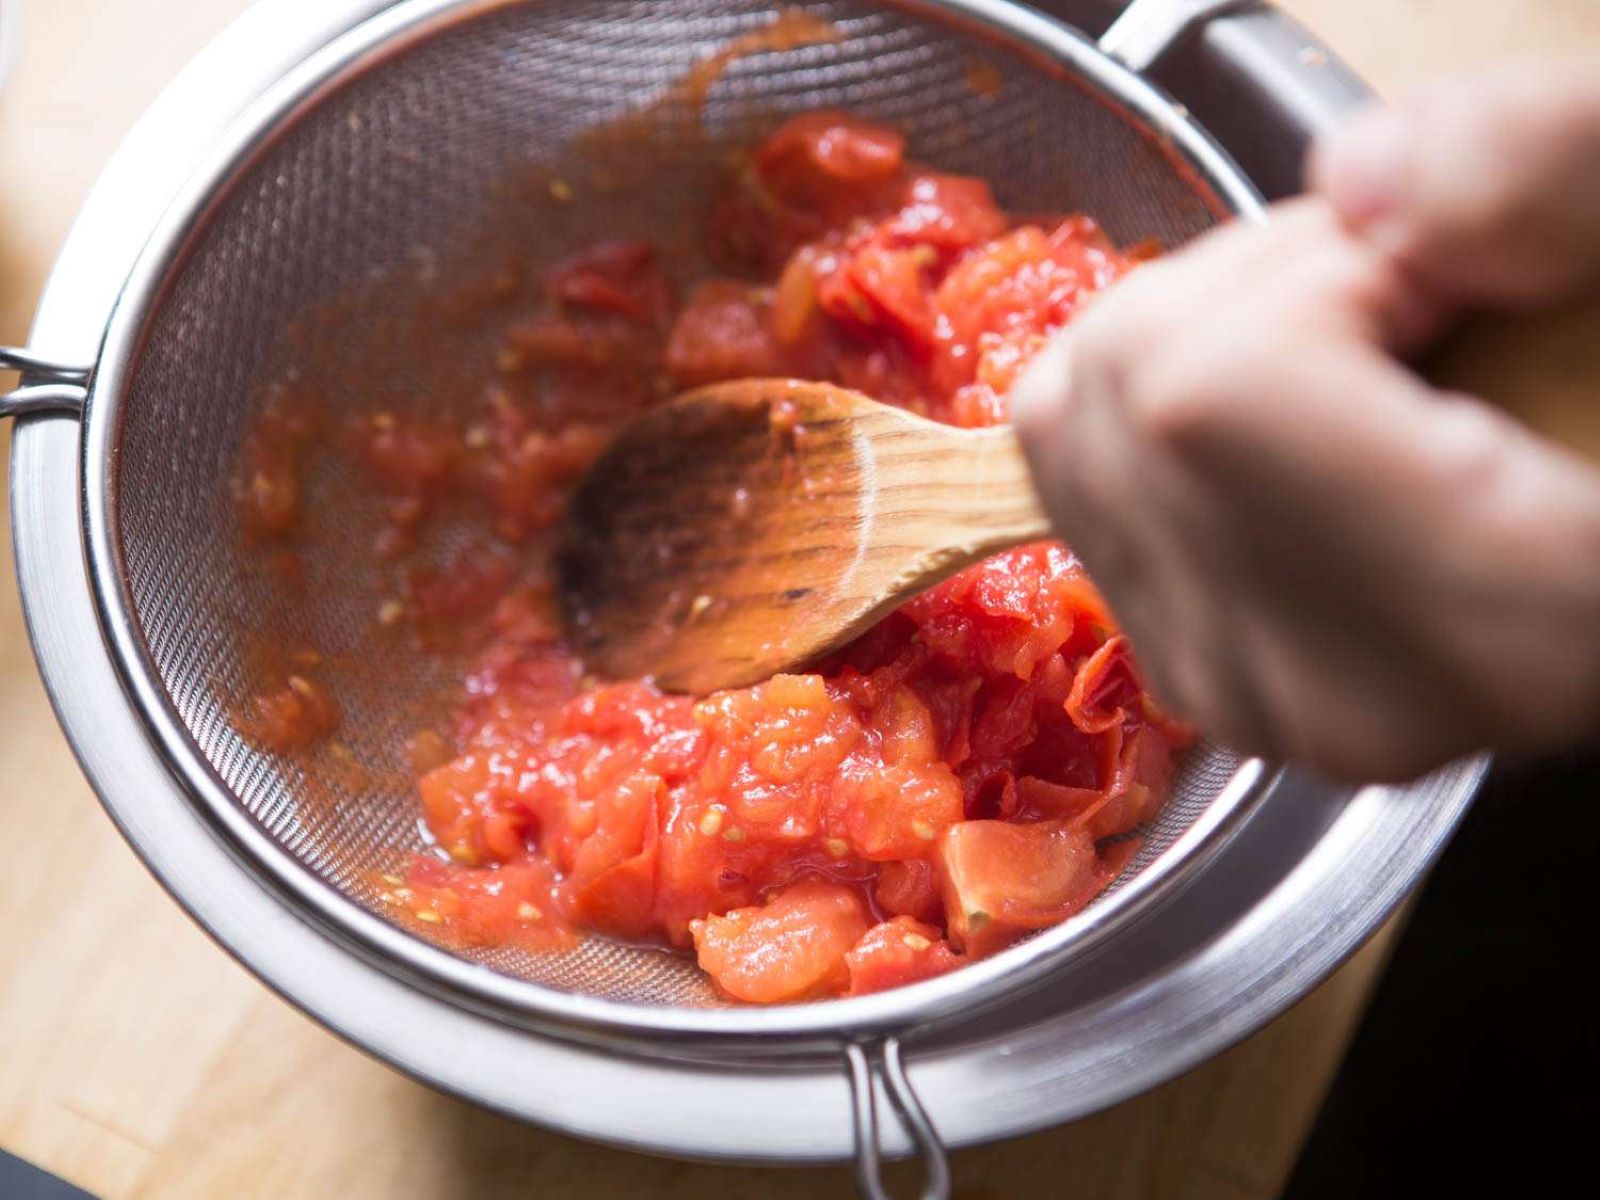 How To Remove Seeds From Tomatoes To Make Sauce